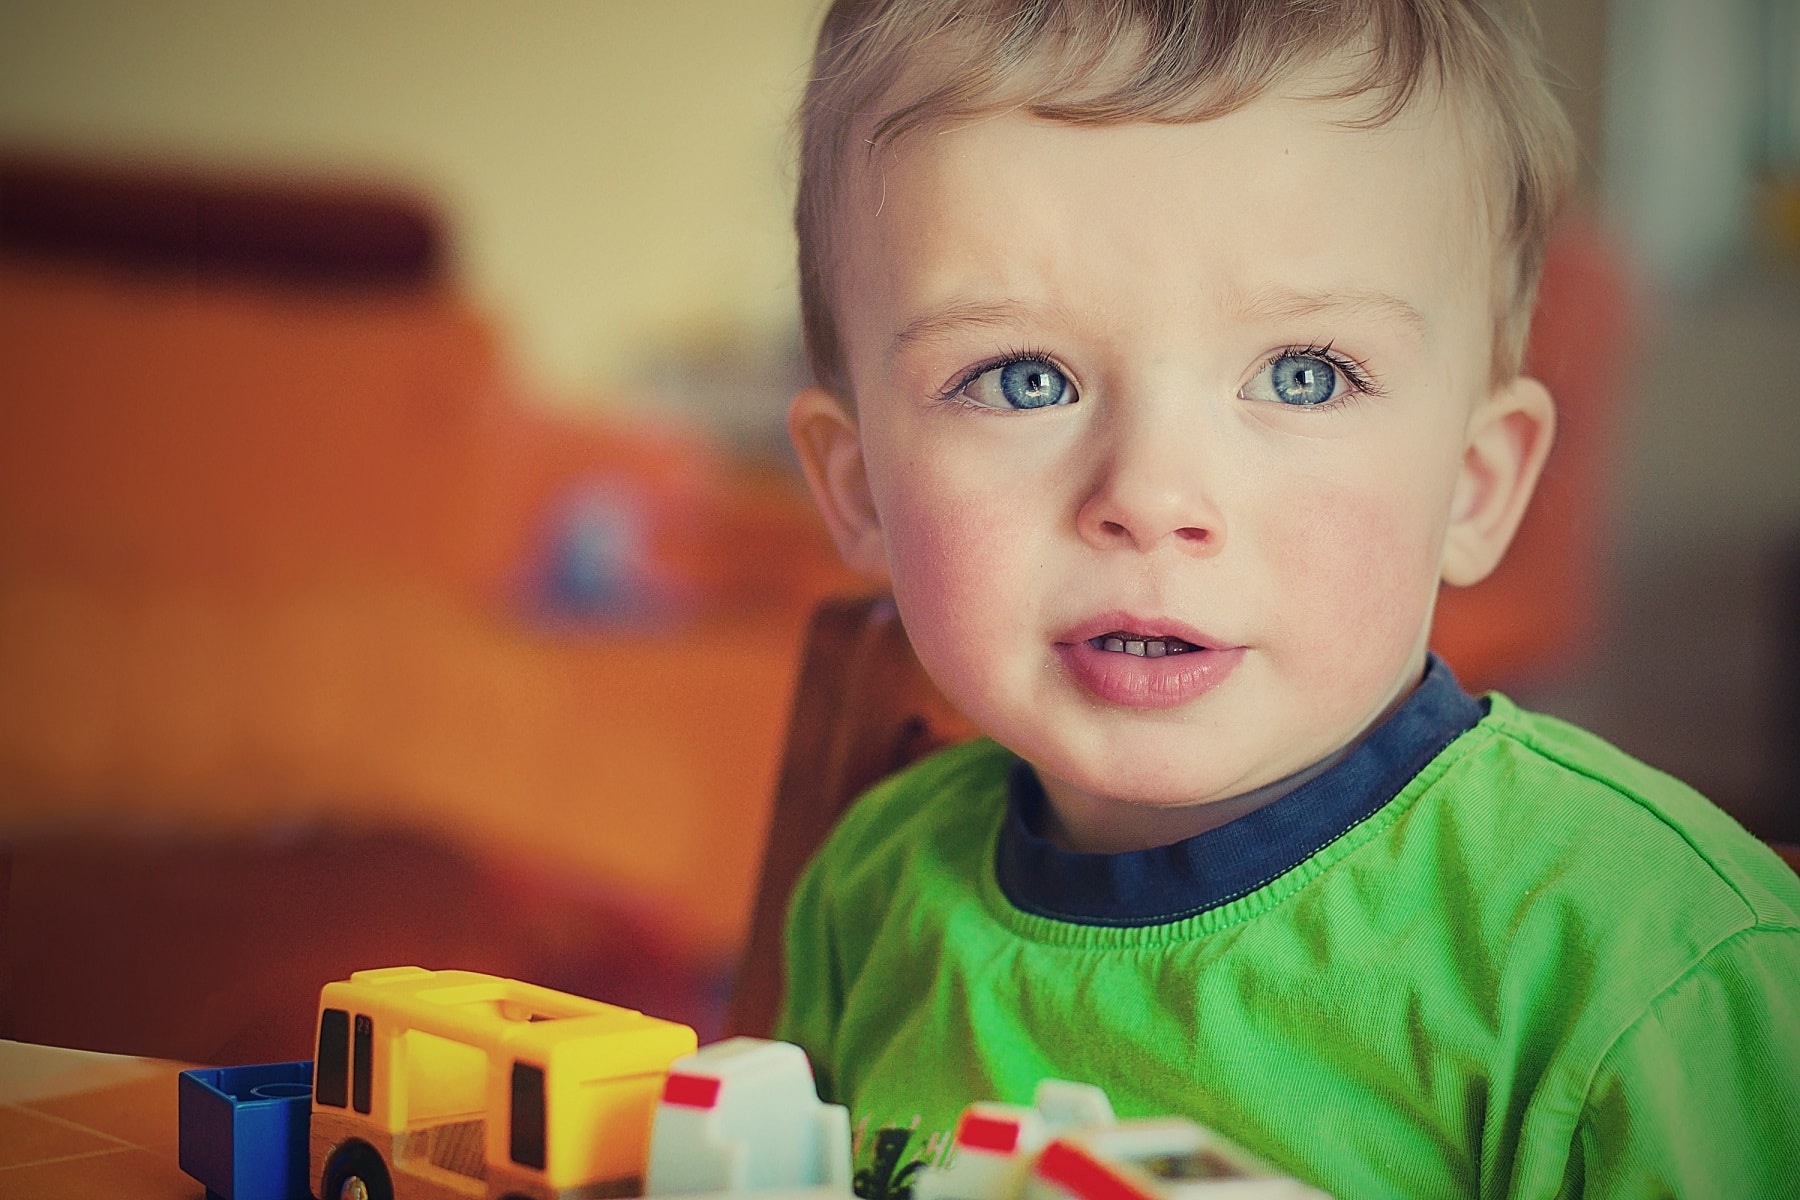 8 Ways To Tell Your Toddler “No” Without Actually Saying It